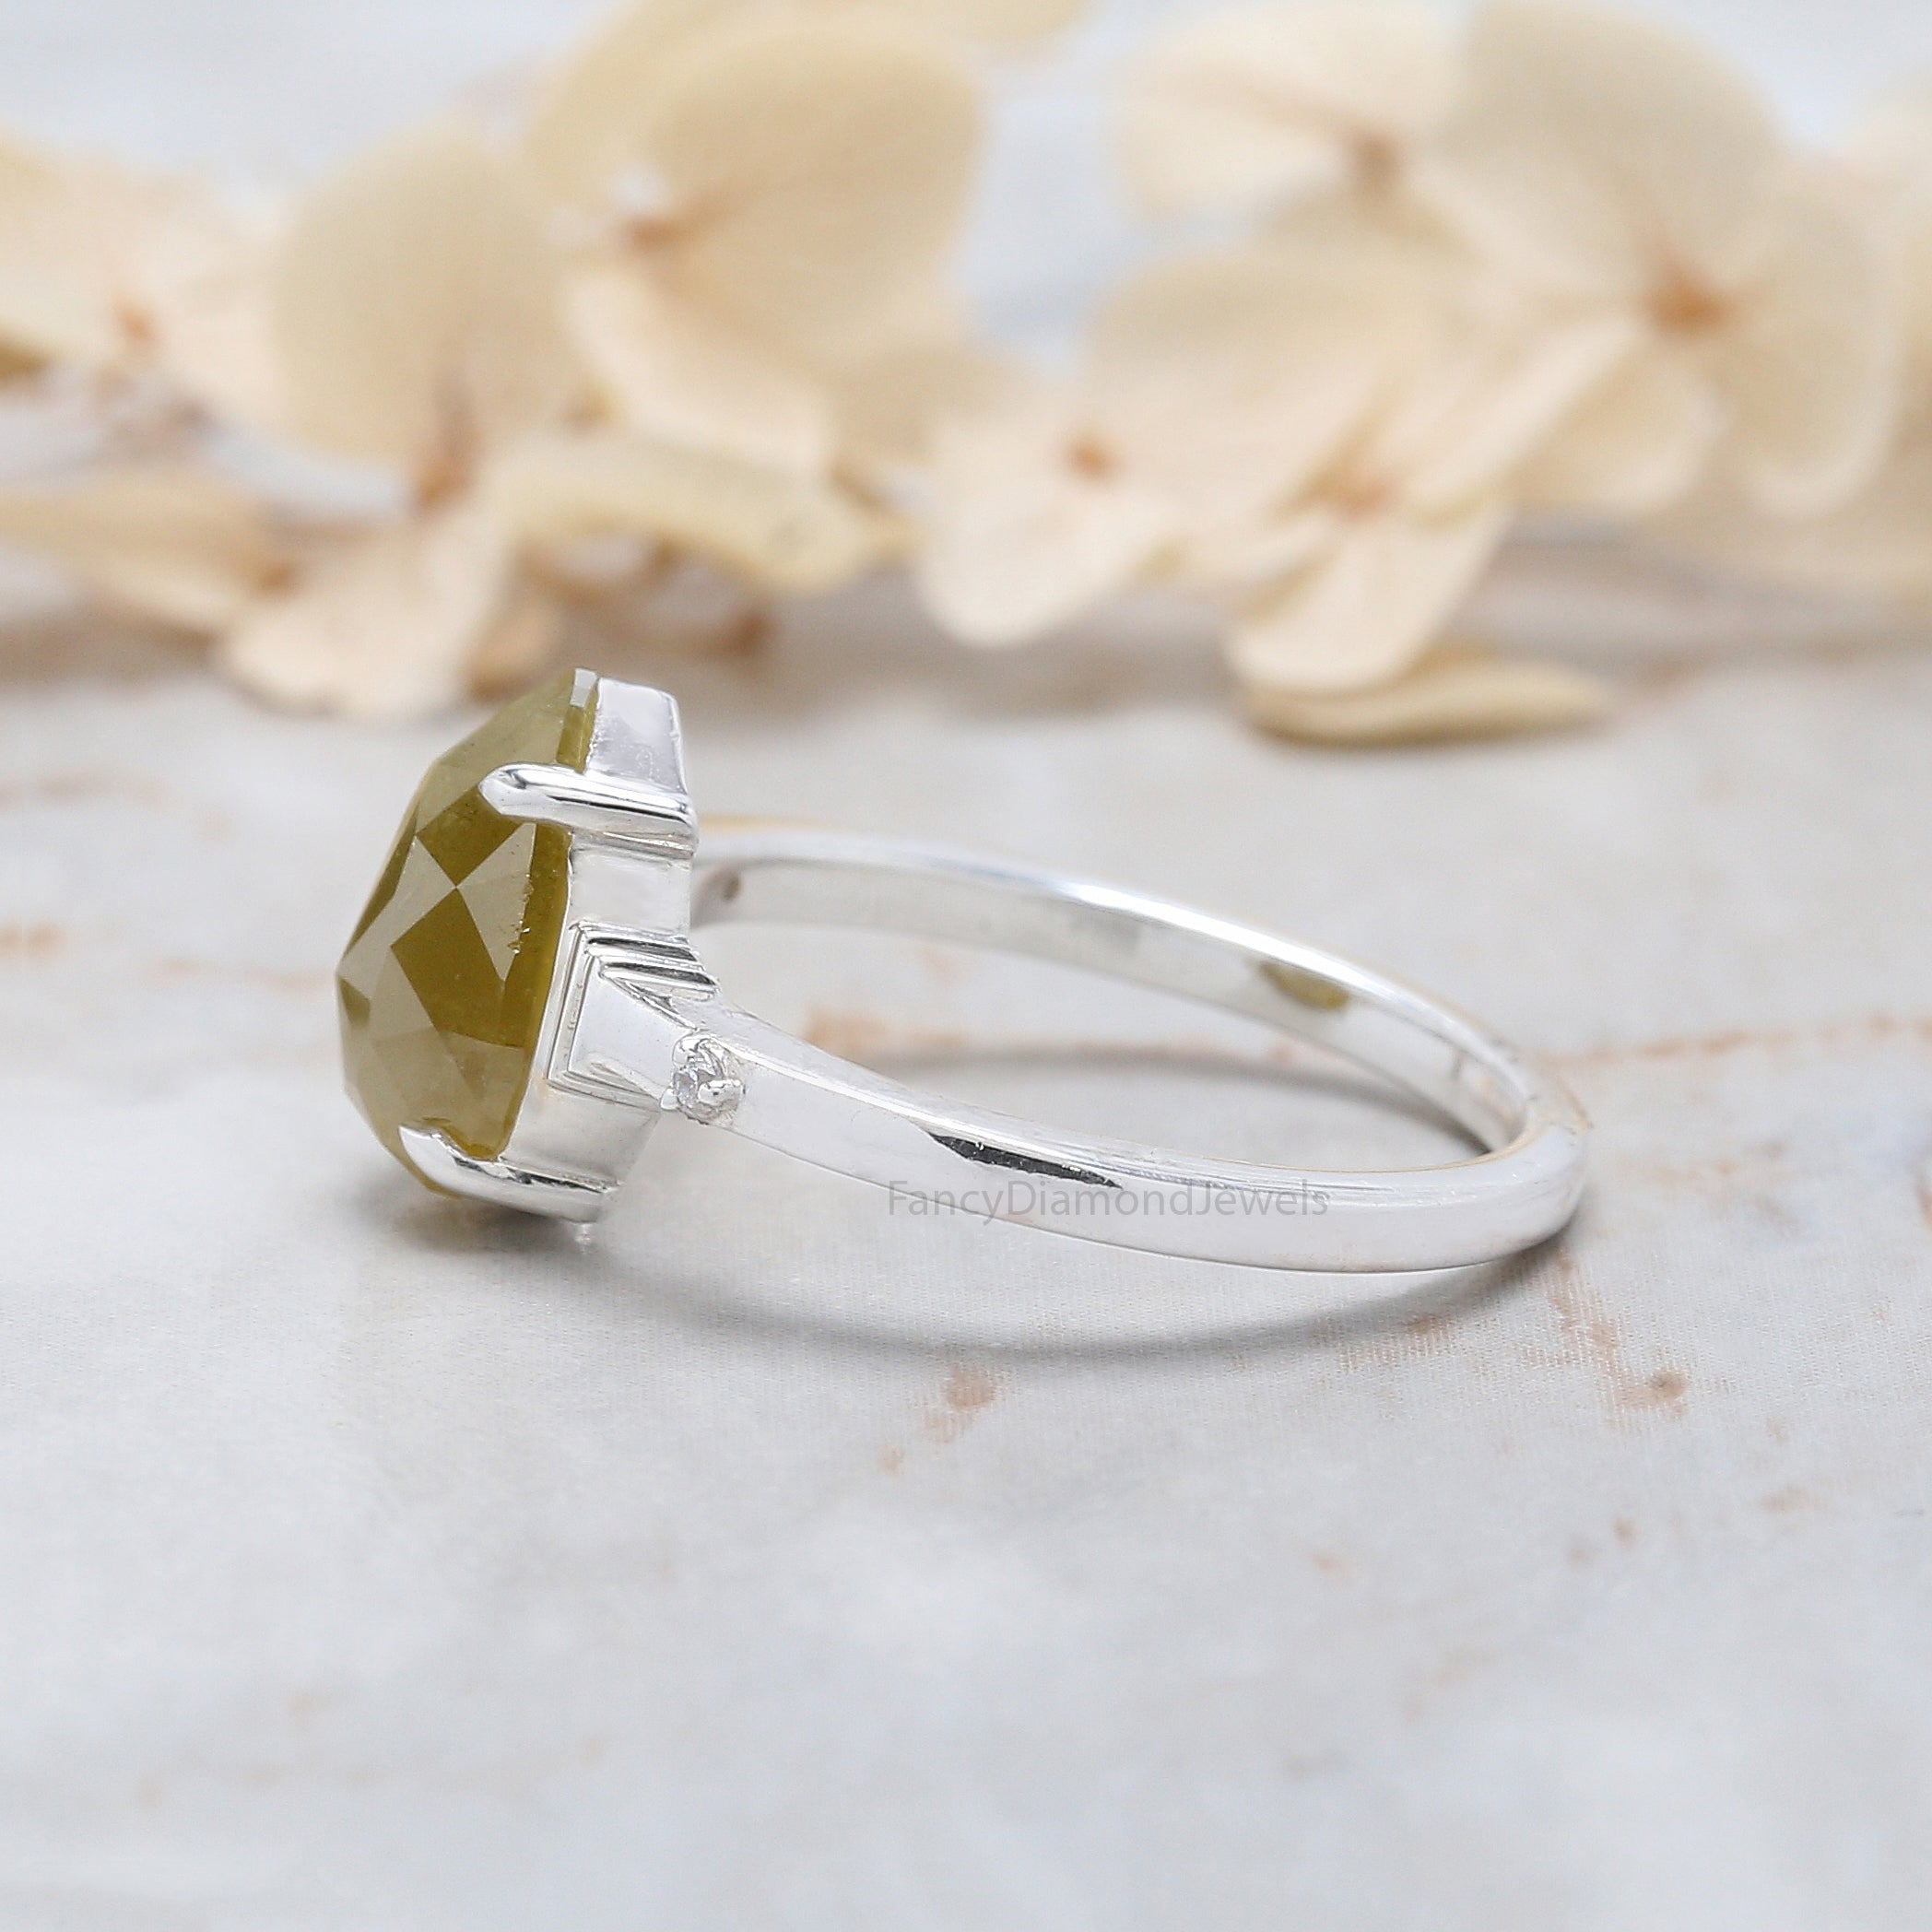 Pear Cut Yellow Color Diamond Ring 2.32 Ct 10.00 MM Pear Diamond Ring 14K Solid White Gold Silver Pear Engagement Ring Gift For Her QN735